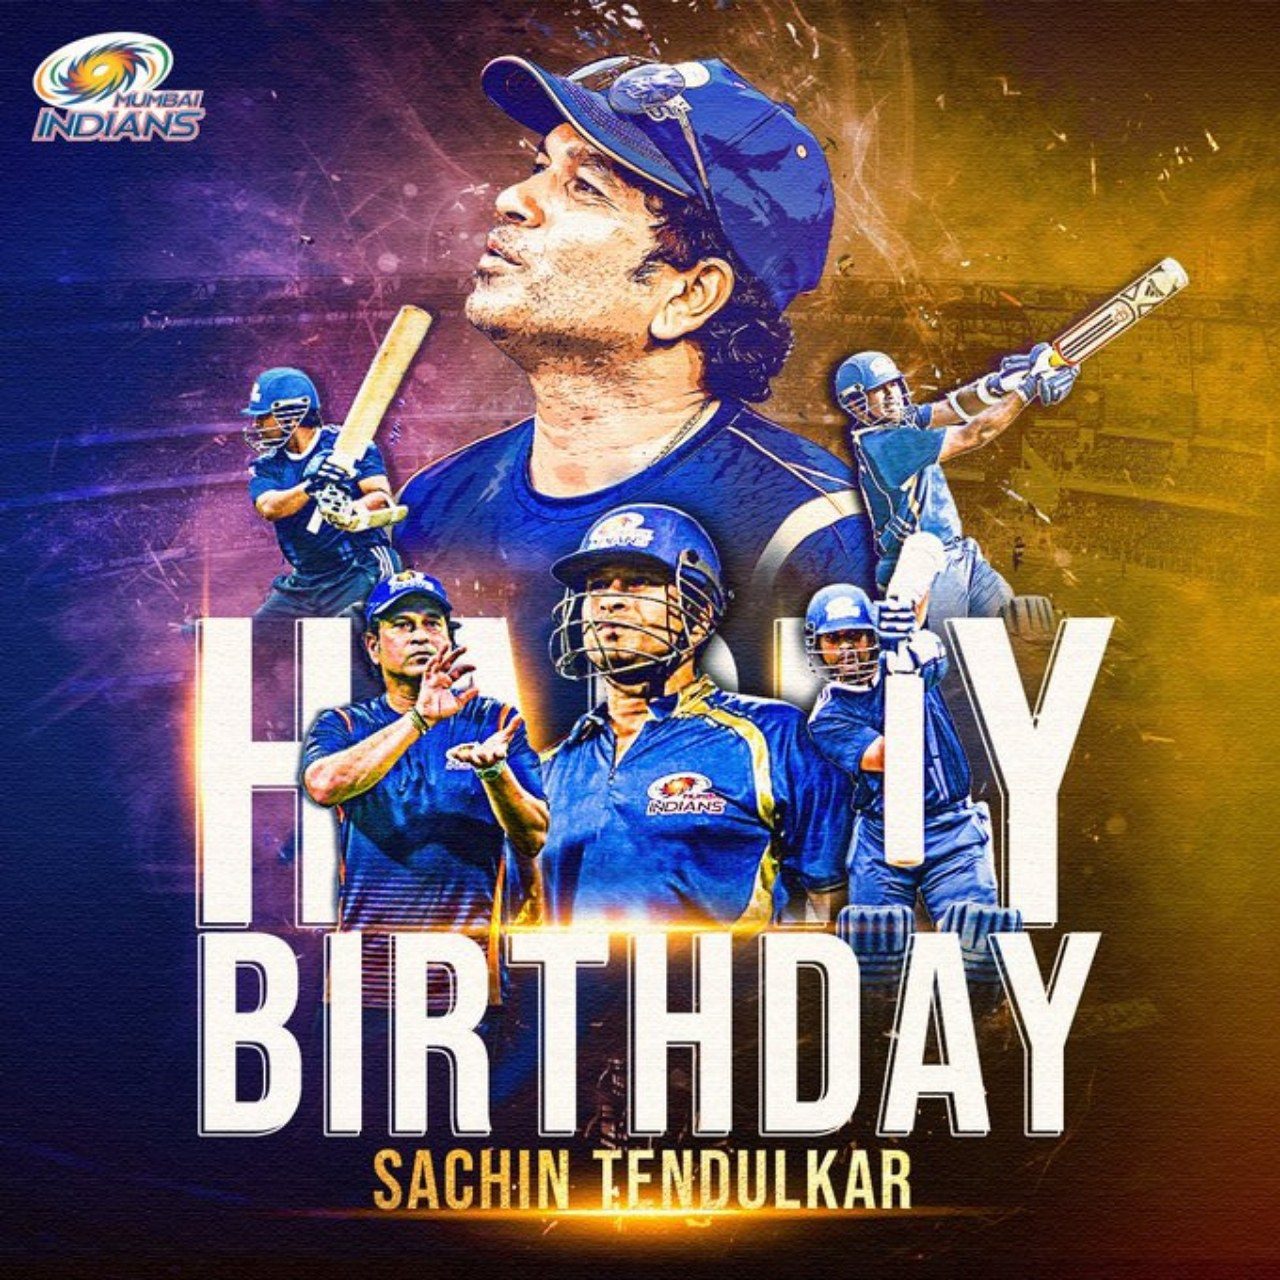 Happy Birthday Sachin Tendulkar: Here's How Twitterati's Greeting 'Little Master' via Wishes, Quotes, Images, Posters, And Status Videos